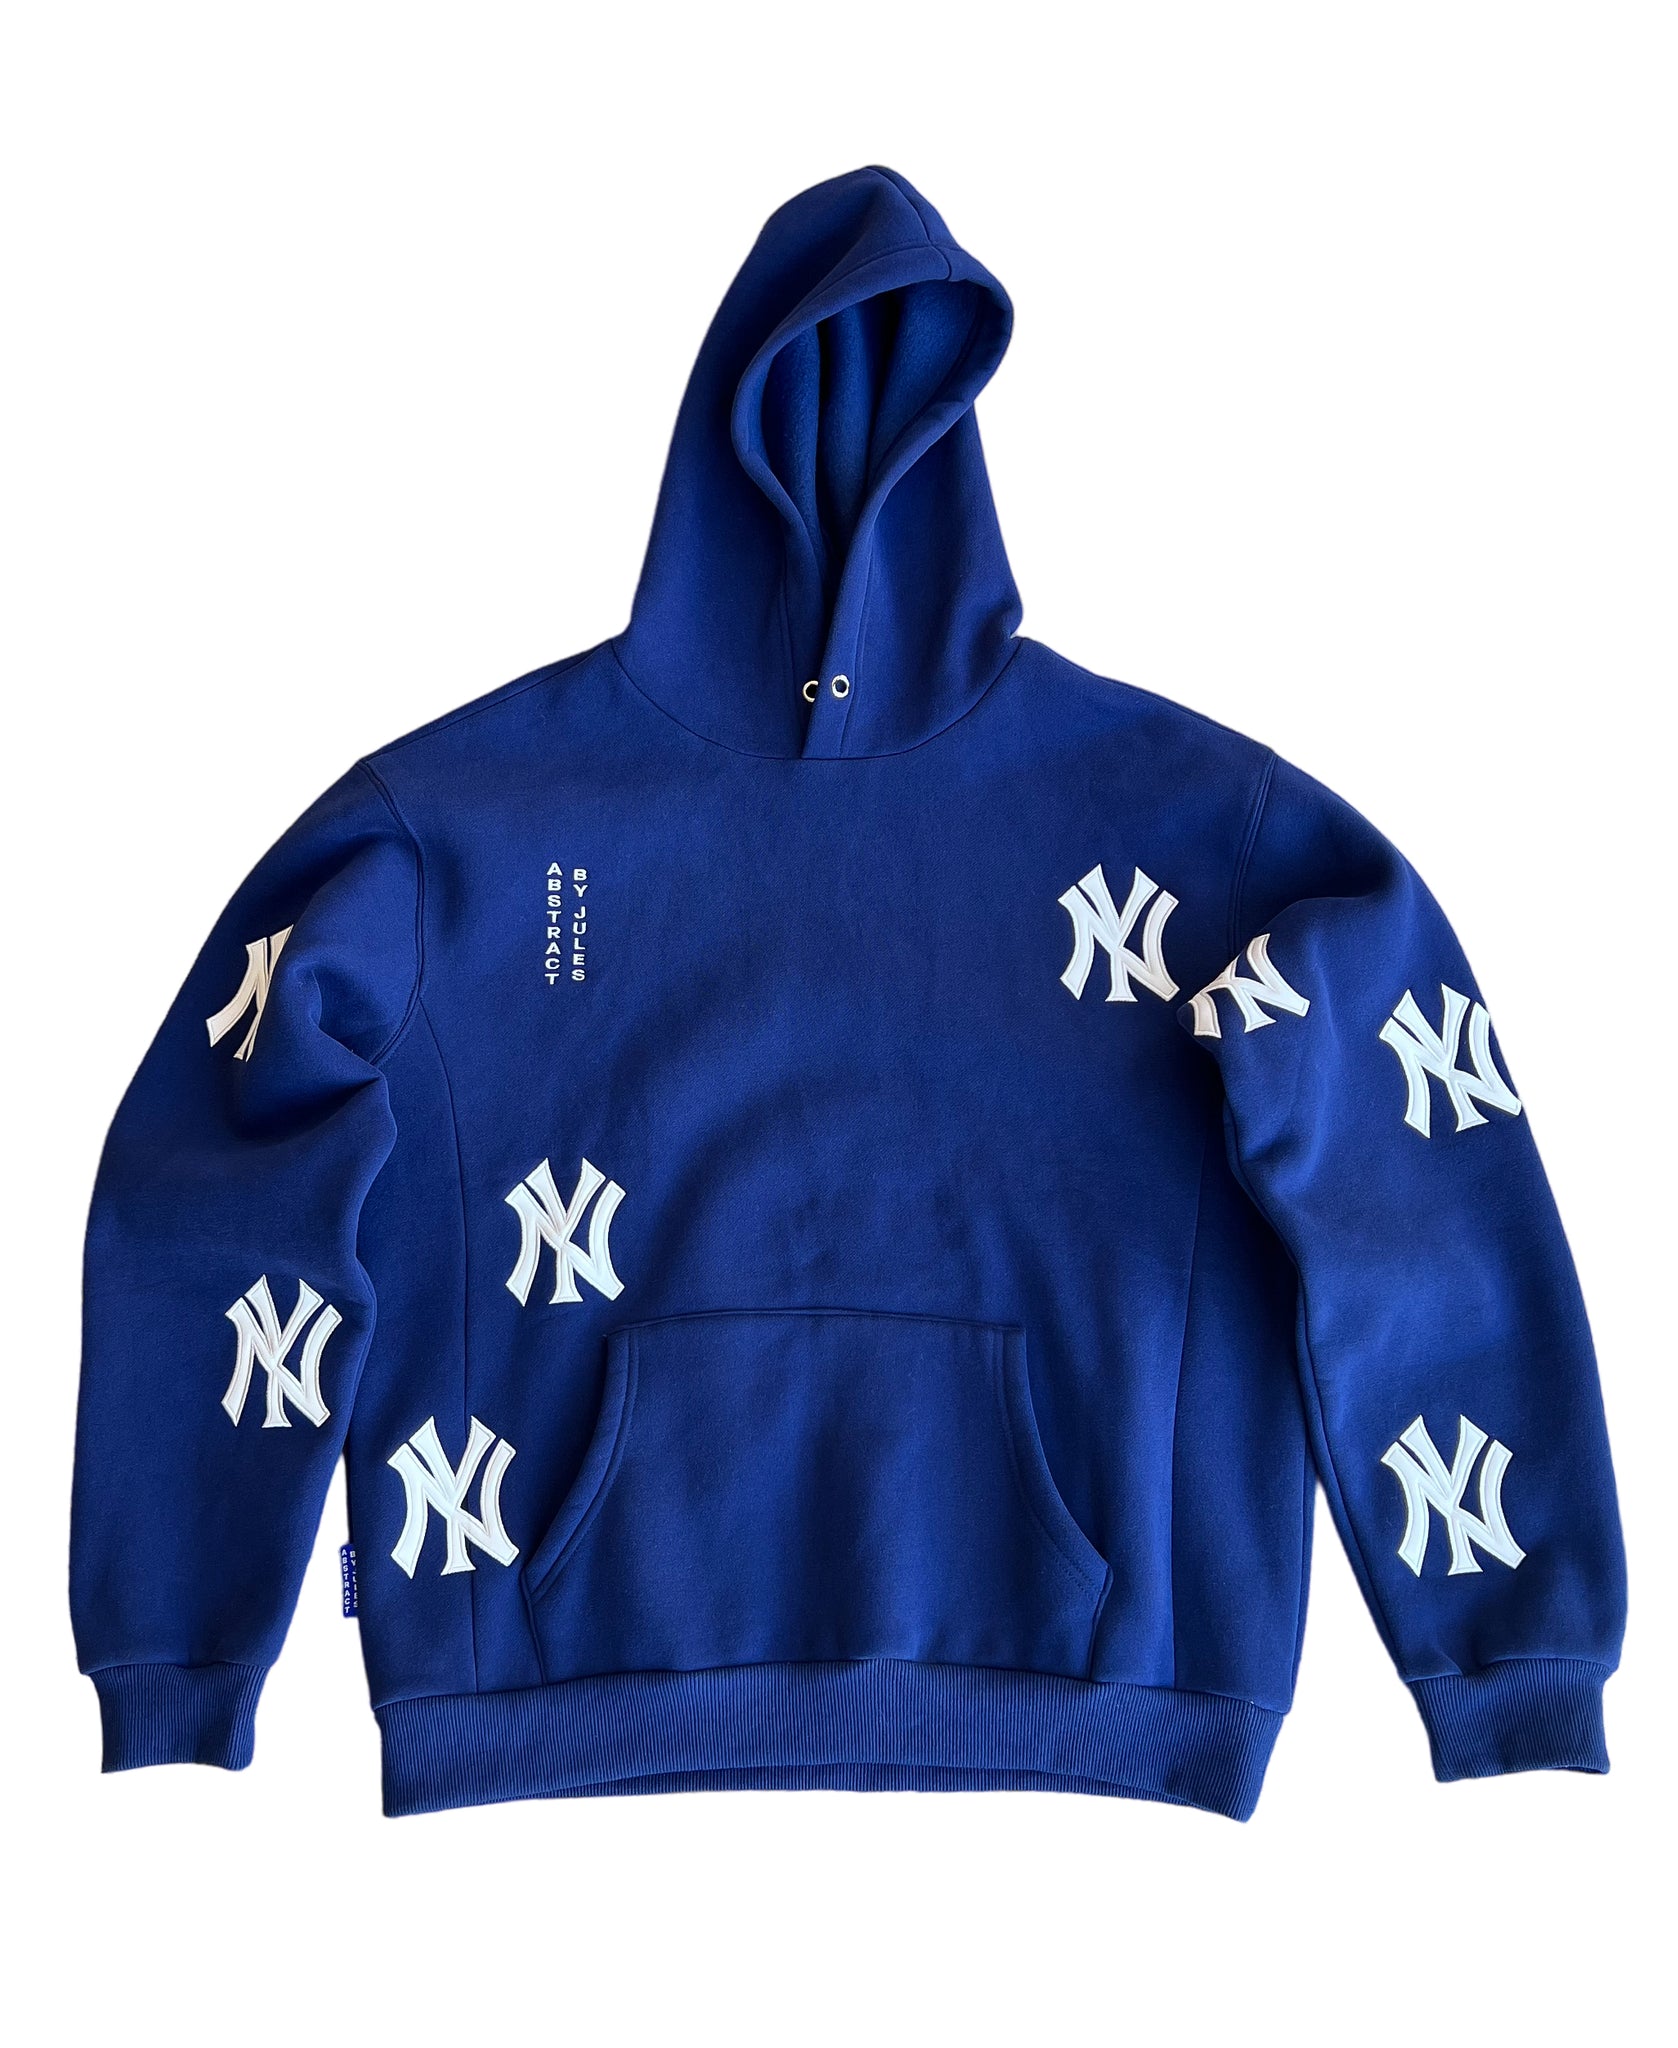 NY Patch Hoodie - Navy